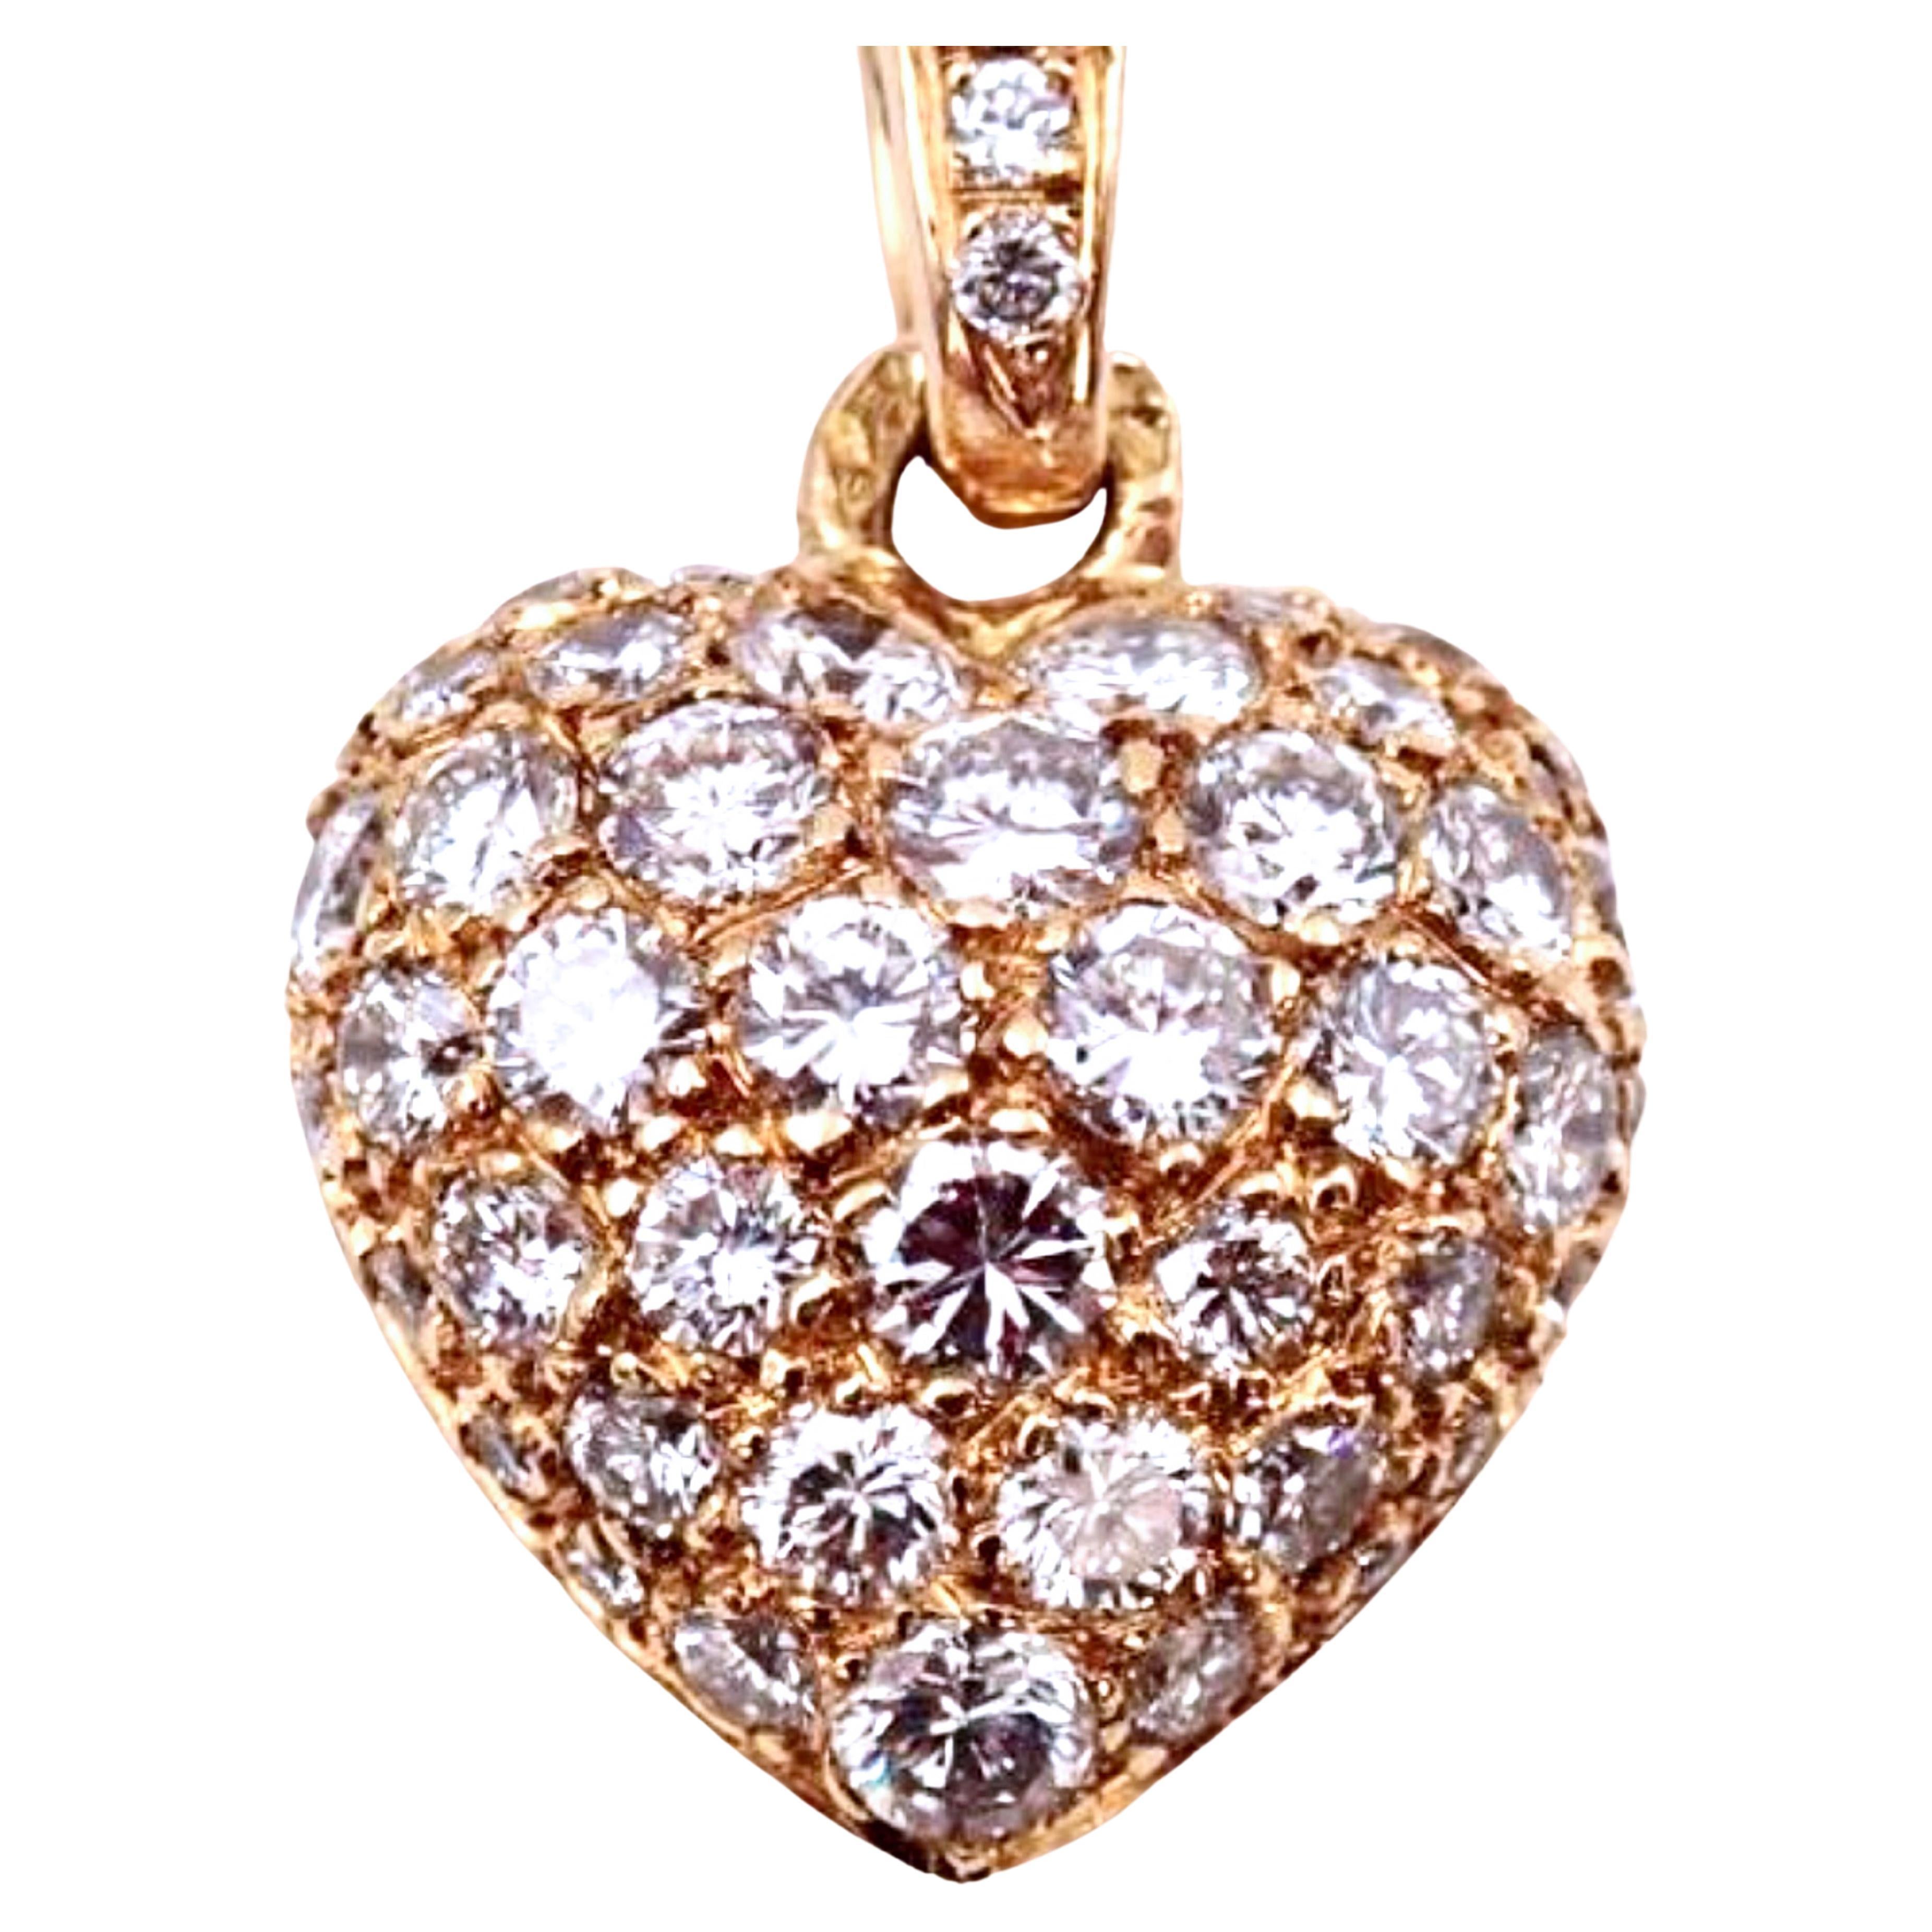 Original 1990, Cartier White Diamond 18Kt Yellow Gold Heart Pendant and Necklace  18.11inches(46cm).
A very precious, iconic Cartier top quality circa 1.44KT white diamond heart in a simple, all time wearable 18kt yellow gold chain (with double